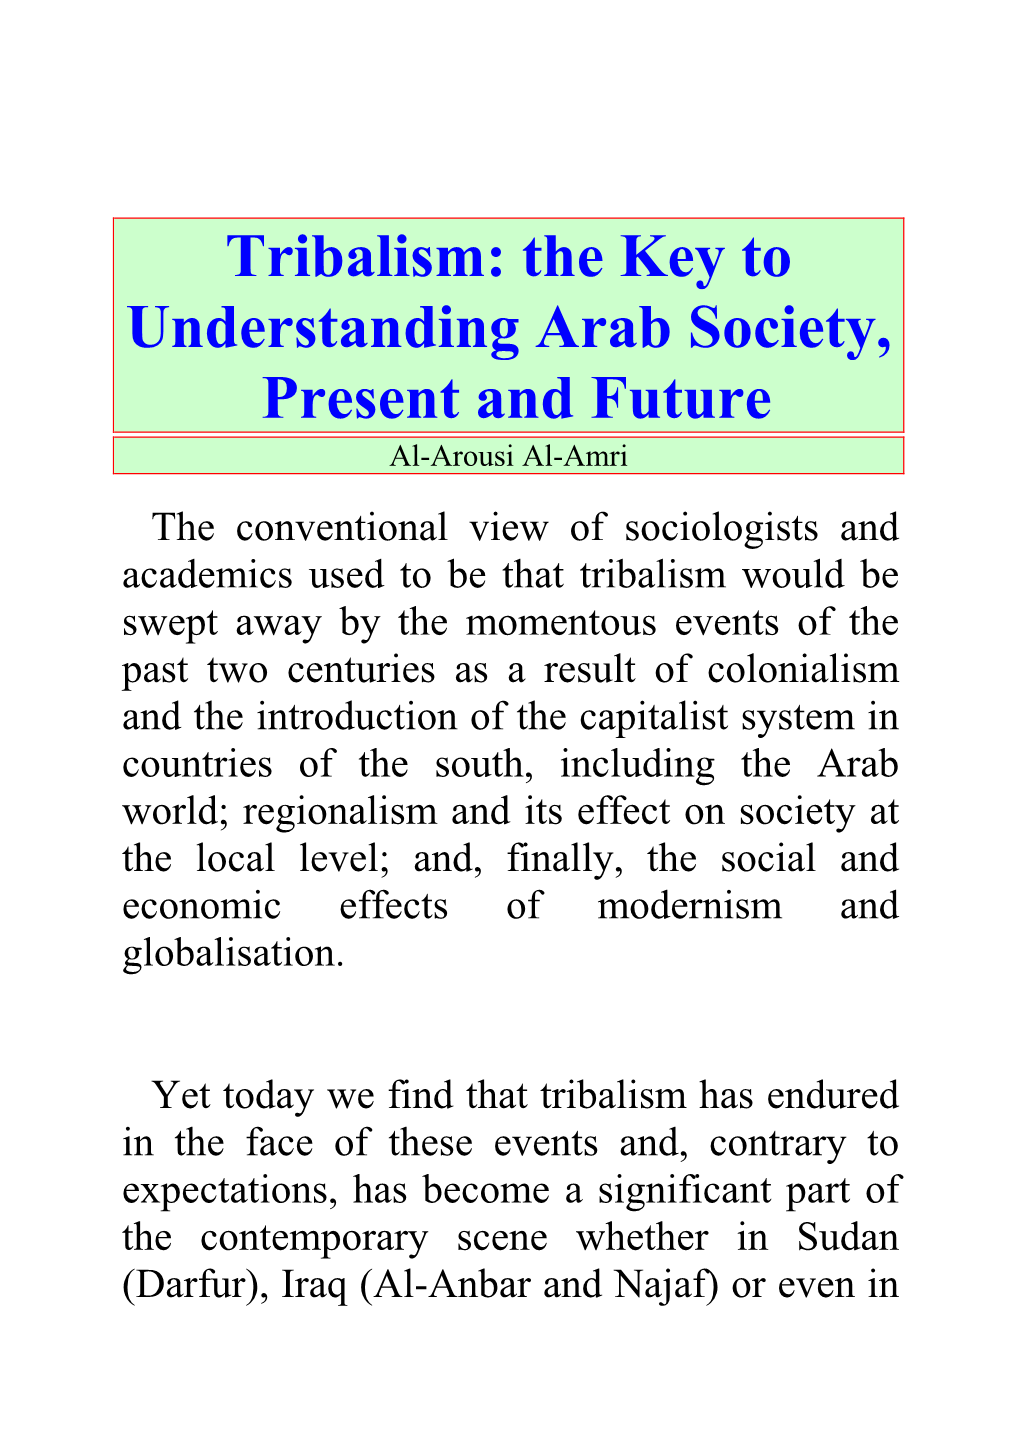 Tribalism: the Key to Understanding Arab Society, Present and Future